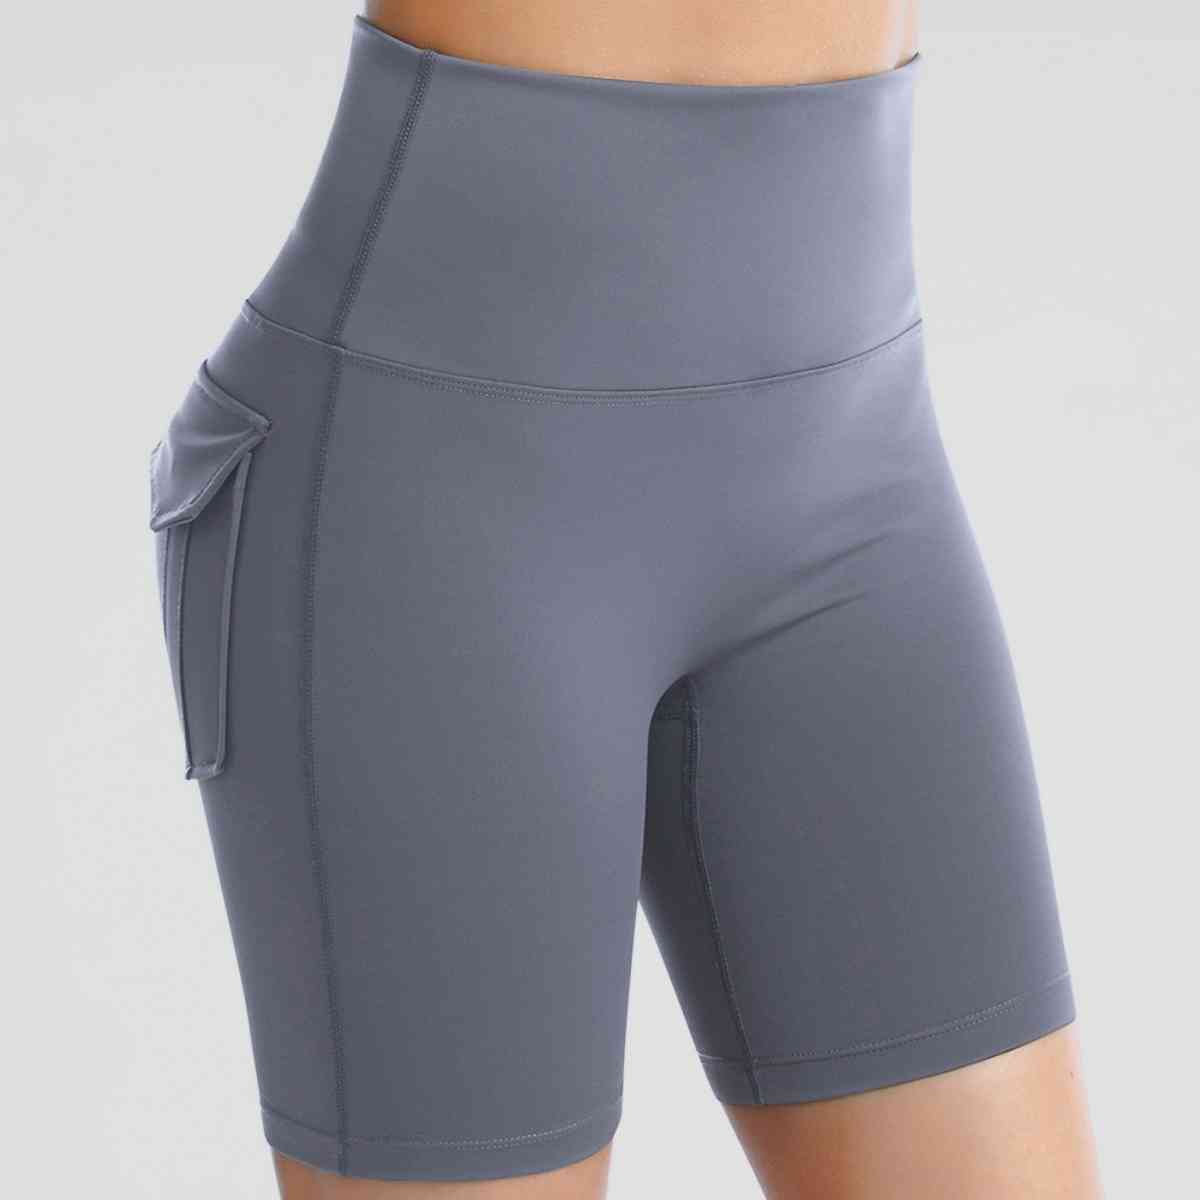 Women’s Wide Waistband Sports Shorts With Pockets